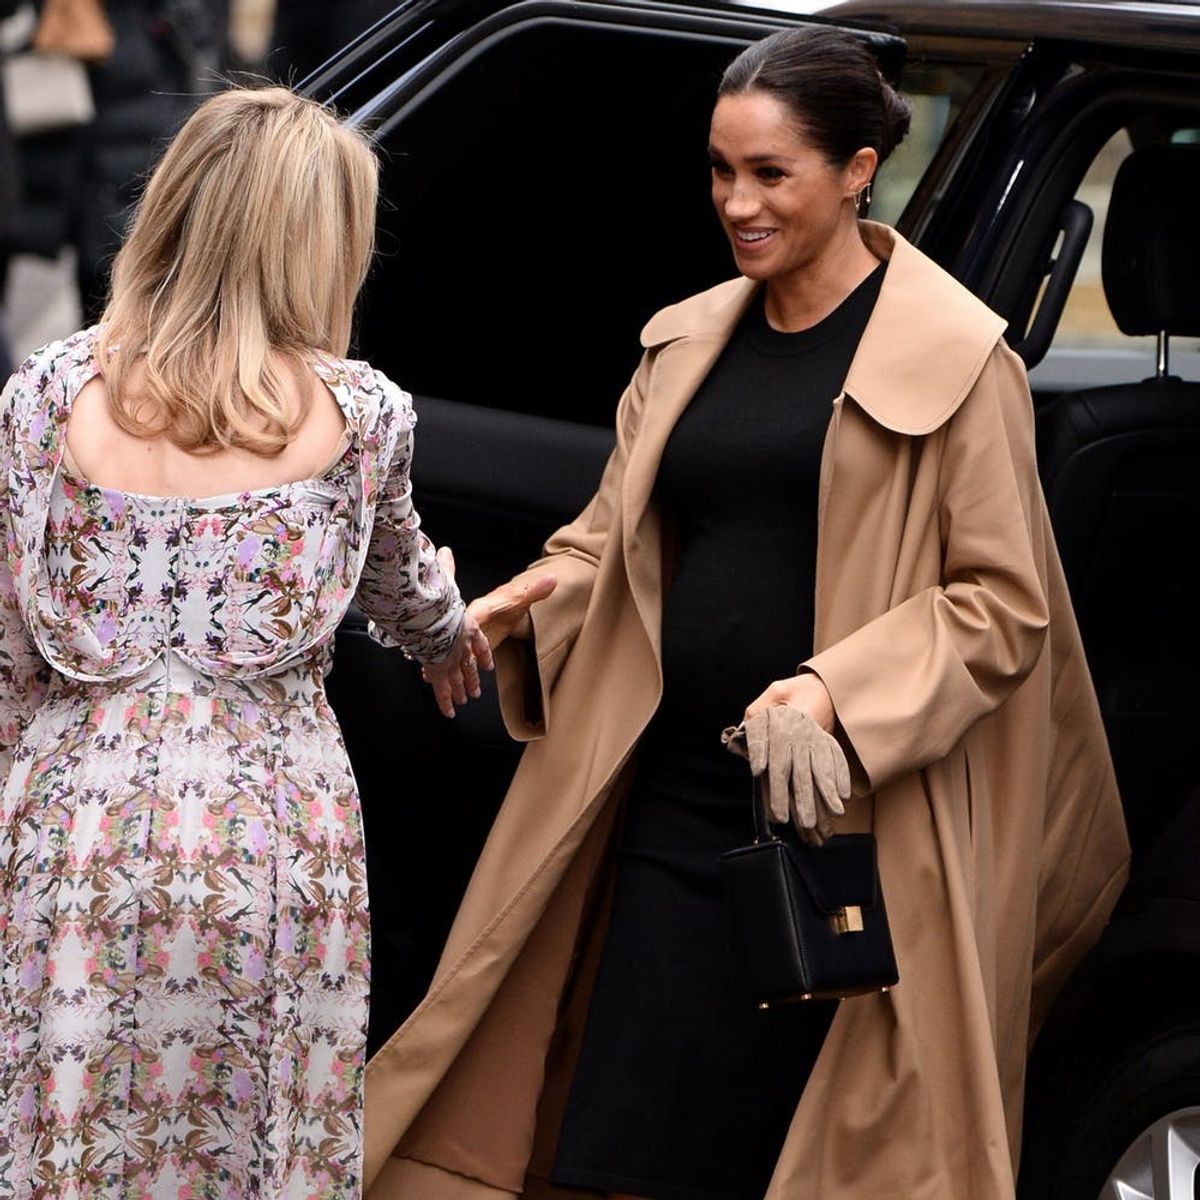 Meghan Markle Takes on New Role: Stylist to Women in Need